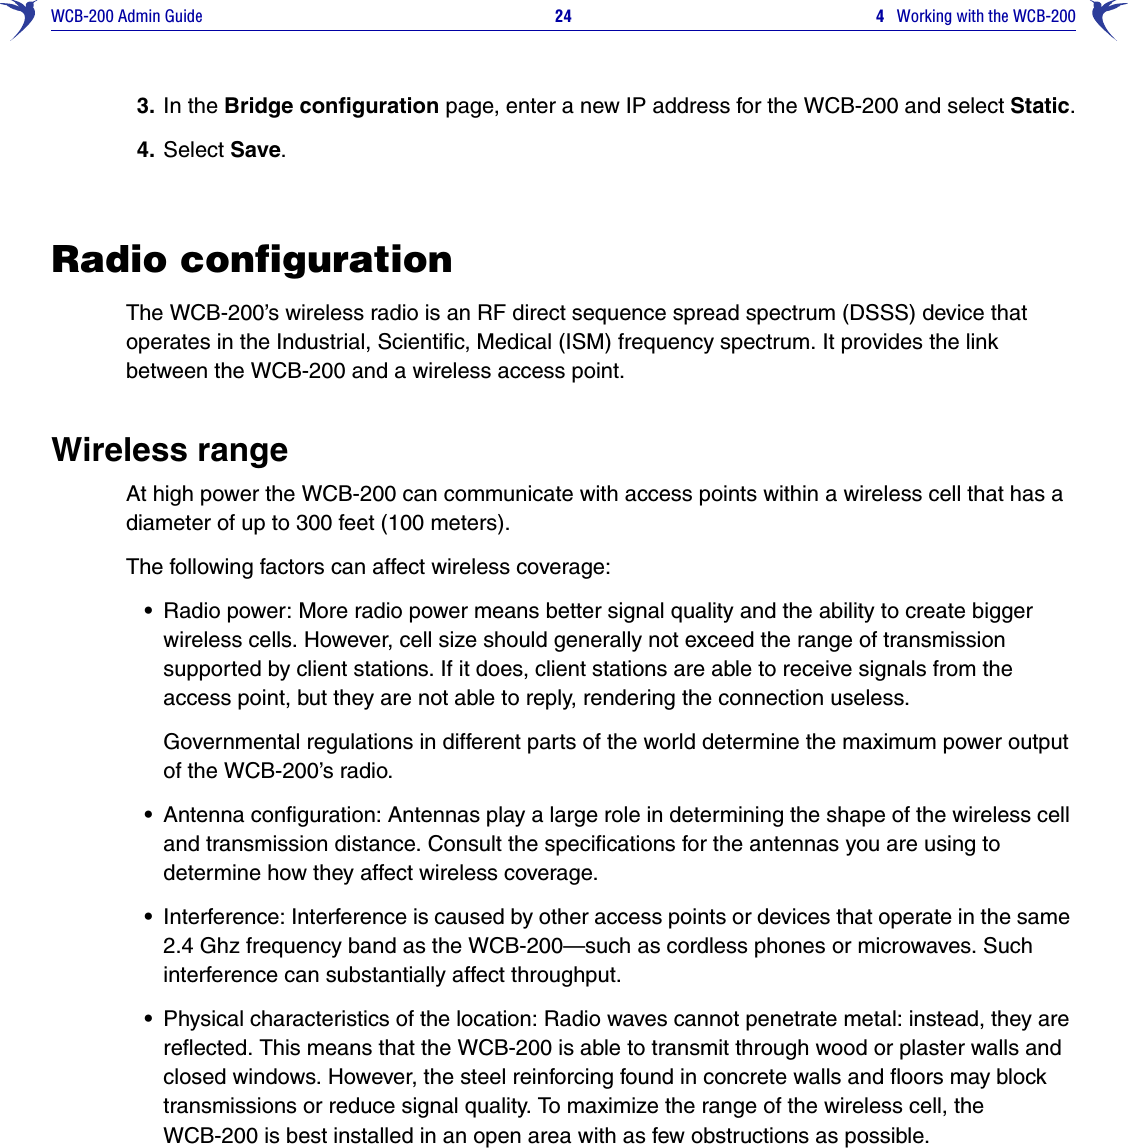 WCB-200 Admin Guide 24  4   Working with the WCB-2003. In the Bridge configuration page, enter a new IP address for the WCB-200 and select Static.4. Select Save.Radio configurationThe WCB-200’s wireless radio is an RF direct sequence spread spectrum (DSSS) device that operates in the Industrial, Scientific, Medical (ISM) frequency spectrum. It provides the link between the WCB-200 and a wireless access point.Wireless rangeAt high power the WCB-200 can communicate with access points within a wireless cell that has a diameter of up to 300 feet (100 meters).The following factors can affect wireless coverage:•Radio power: More radio power means better signal quality and the ability to create bigger wireless cells. However, cell size should generally not exceed the range of transmission supported by client stations. If it does, client stations are able to receive signals from the access point, but they are not able to reply, rendering the connection useless.Governmental regulations in different parts of the world determine the maximum power output of the WCB-200’s radio. •Antenna configuration: Antennas play a large role in determining the shape of the wireless cell and transmission distance. Consult the specifications for the antennas you are using to determine how they affect wireless coverage.•Interference: Interference is caused by other access points or devices that operate in the same 2.4 Ghz frequency band as the WCB-200—such as cordless phones or microwaves. Such interference can substantially affect throughput. •Physical characteristics of the location: Radio waves cannot penetrate metal: instead, they are reflected. This means that the WCB-200 is able to transmit through wood or plaster walls and closed windows. However, the steel reinforcing found in concrete walls and floors may block transmissions or reduce signal quality. To maximize the range of the wireless cell, the WCB-200 is best installed in an open area with as few obstructions as possible. 